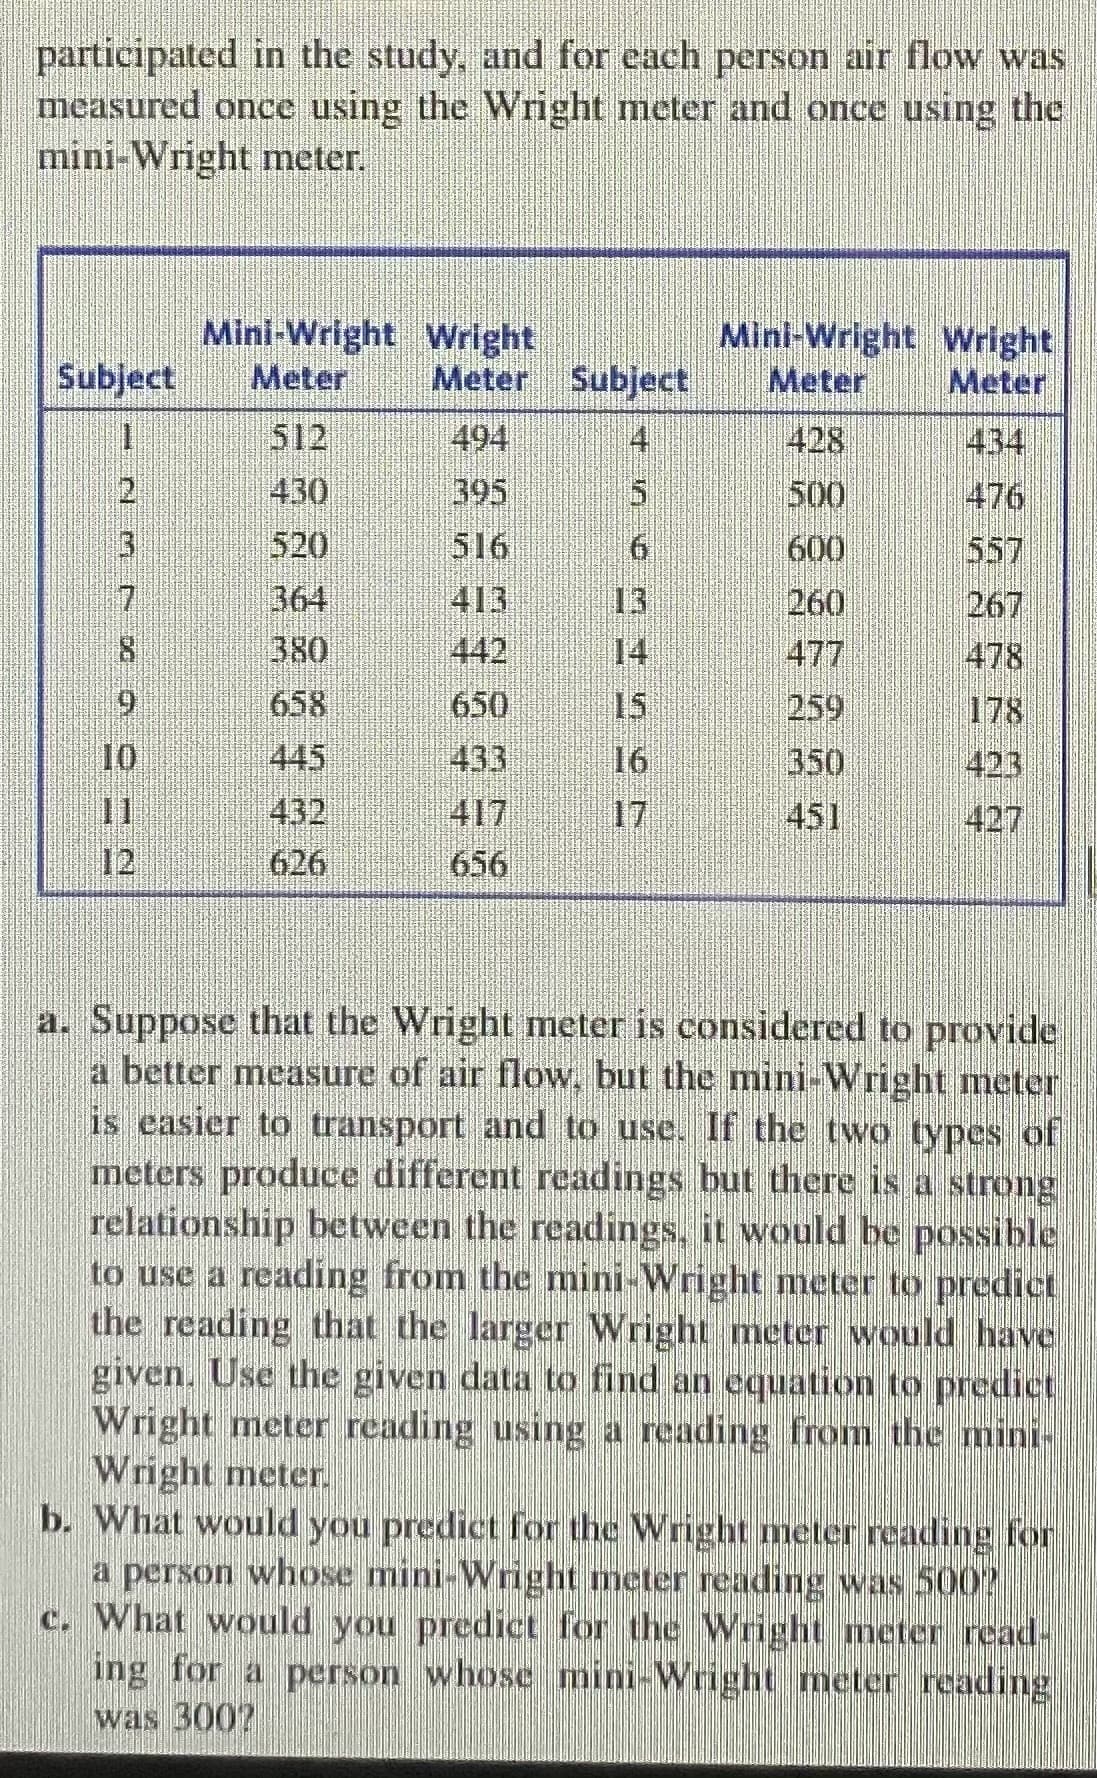 participated in the study, and for each person air flow was
measured once using the Wright meter and once using the
mini-Wright meter.
Mini-Wright Wright
Meter
Mini-Wright Wright
Meter
Subject
Meter Subject
Meter
1.
512
494
4
428
500
434
430
395
476
520
516
600
557
7
413
364
380
13
14
260
267
478
8.
442
477
6.
658
650
15
259
178
10
445
433
16
350
423
11
12
432
626
417
656
17
451
427
a. Suppose that the Wright meter is considered to provide
a better measure of air flow, but the mini-Wright meter
is easier to transport and to use. If the two types of
meters produce different readings but there is a strong
relationship between the readings, it would be possible
to use a reading from the mini-Wright meter to predict
the reading that the larger Wright meter would have
given. Use the given data to find an equation to predict
Wright meter reading using a reading from the mini-
Wright meter.
b. What would you predict for the Wright meter reading for
a person whose mini-Wright meter reading was 500?
c. What would you predict for the Wright meter read-
ing for a person whose mini-Wright meter reading
was 300?
三
